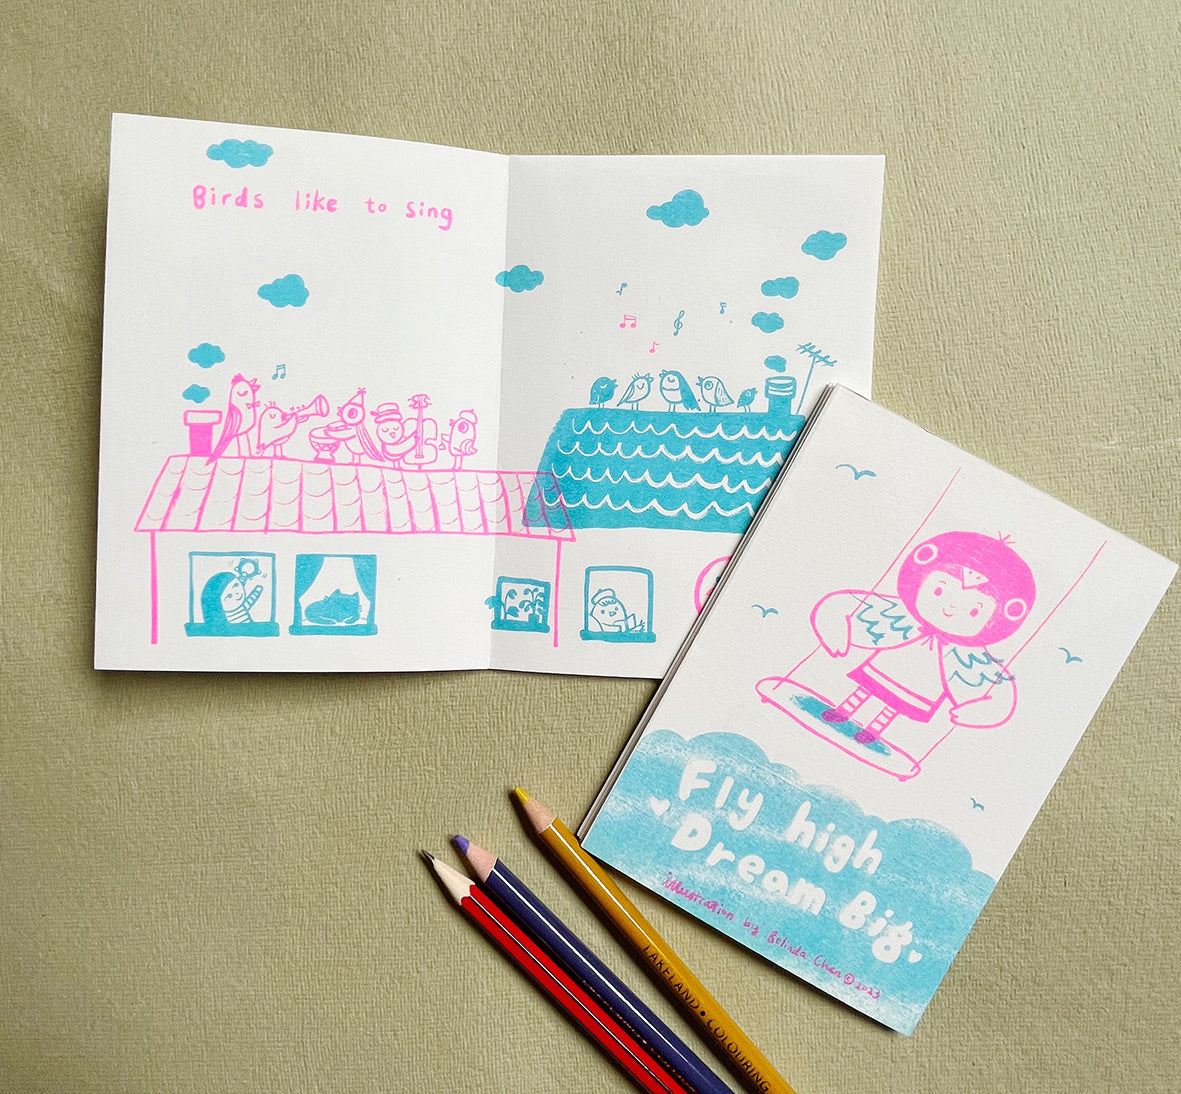 I Like Birds Zine - A6 Risograph Zine (Sky Blue and Pink colourway)